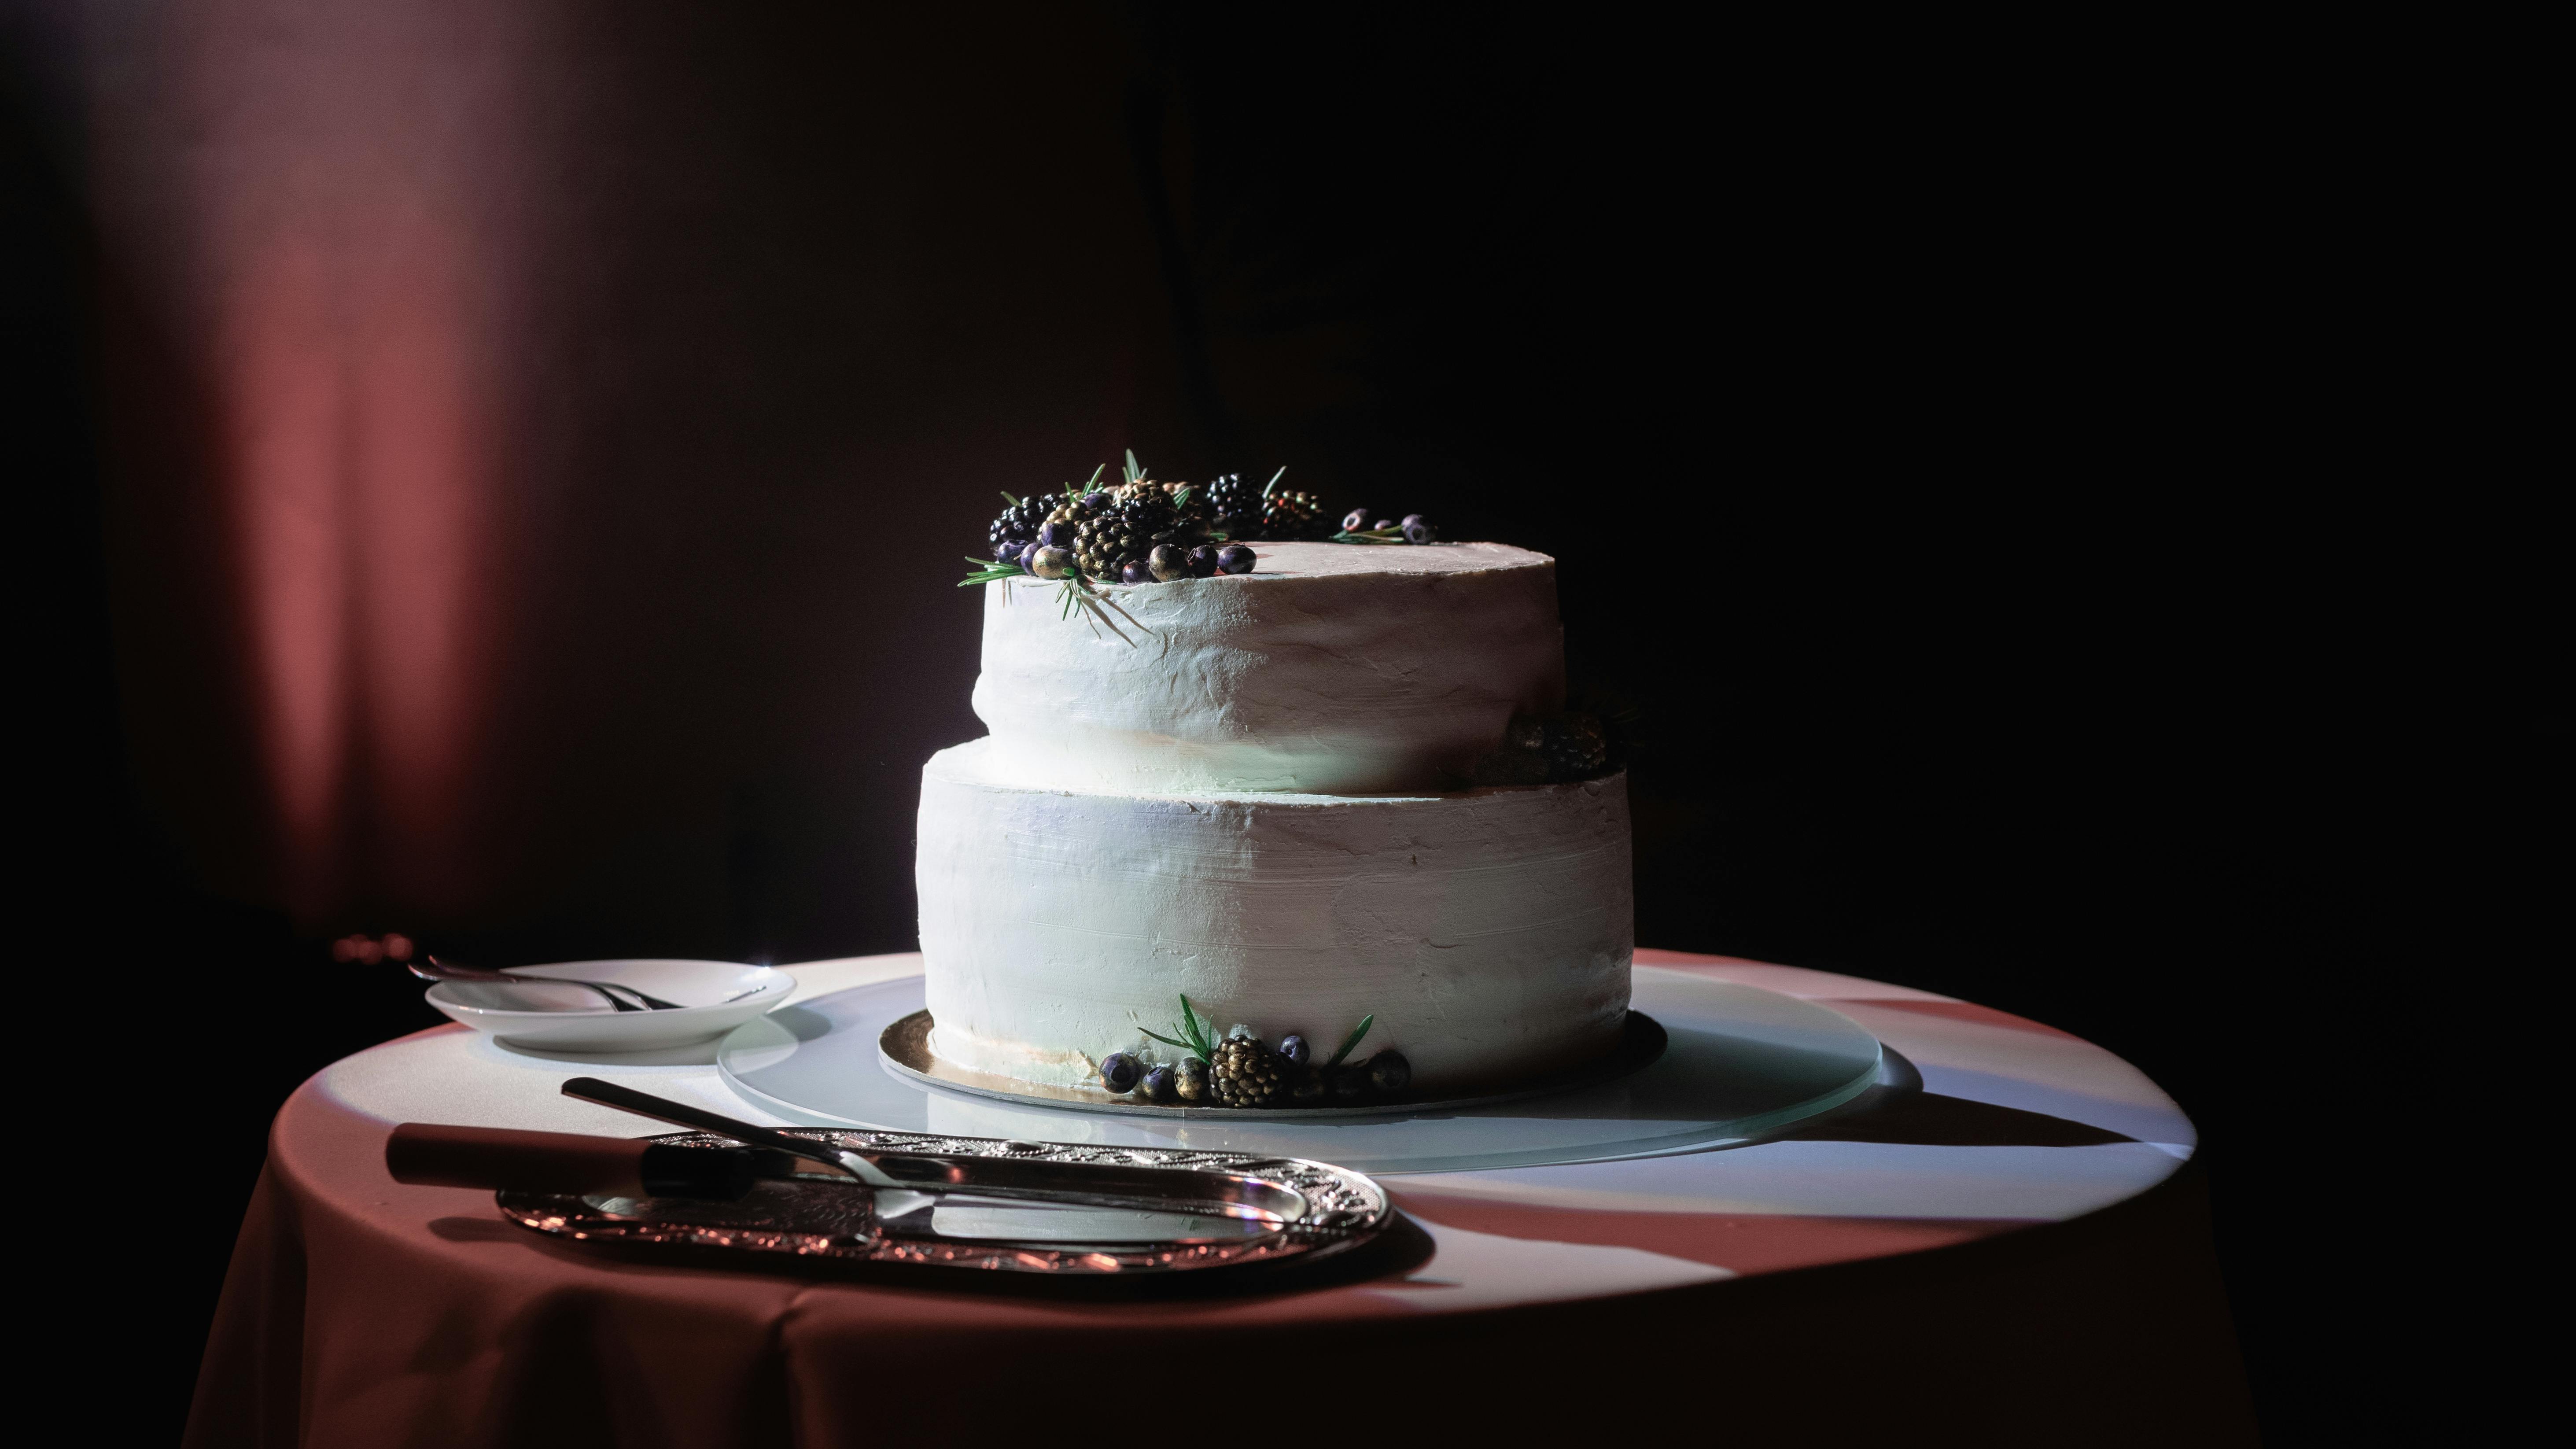 Two-layer cake | Source: Pexels